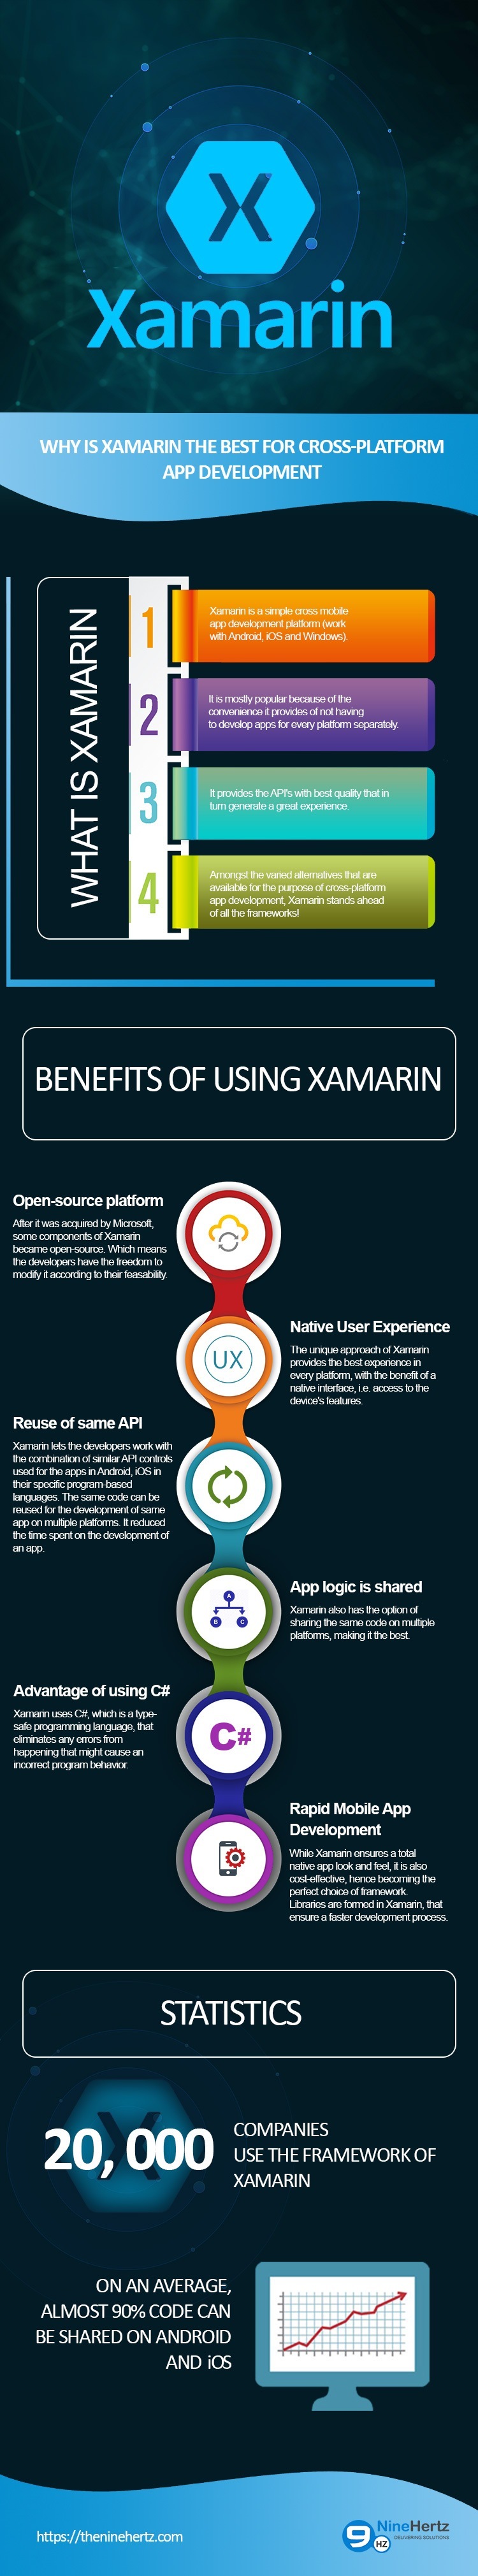 PY

Xamarin

PL ney

WHAT IS XAMARIN

 

 

 

BENEFITS OF USING XAMARIN

 

Open-source platform
PETITE PER TIYS SY
SOme: components of Xesnesn

[Ee Te CRE TTR Ee PE
the: Gevolopens hive he: froodom
rel

Native User Experience
The unque approsch of Xernesn

[EE EL BEET Er]

LENT SRT Pe LEG
[TINE STIs PRY 3
Ere TYE

Reuse of same API

PLT Ep
thes combneston of semis A! conus
LE re
LAE Eade ope ies tet att]

[Er Te per
NL Ep ee Te py
BLY EN]
thes dere spent on Be devesoprment of

tl 24)
App logic is shared
pT Ee Yes Te
shang he same cooe an mug:
plationTe, mesang € $1 best
Advantage of using C#

PIN CR ST
Pr err
LET
[EST PE
LT

Rapid Mobile App
Development

Kr eT
oe TER
fp Ee RE
JER TE
Uwaanes; are Sormed in Xasmenn, het
LT PP I Te

[FY]

 

STATISTICS

 

COMPANIES
20, (0,00) USE THE FRAMEWORK OF

pV EN]

ON AN AVERAGE,
ALMOST 90% CODE CAN
BE SHARED ON ANDROID
AD R(0)